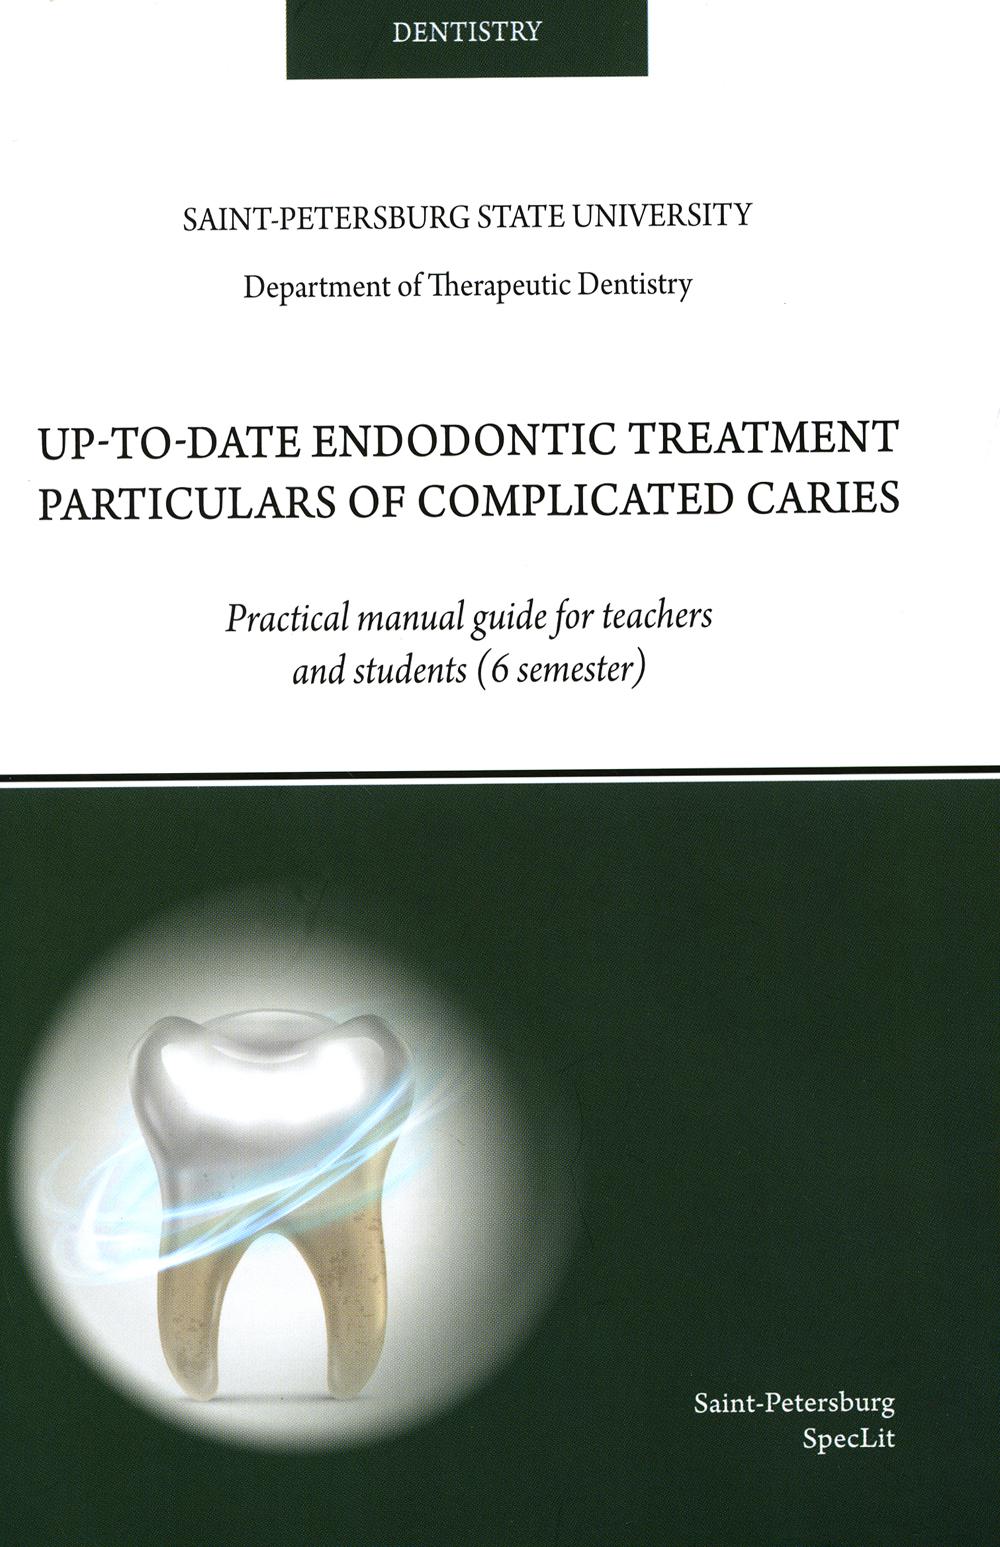 Up-to-date endodontic treatment particulars of complicated caries:  .